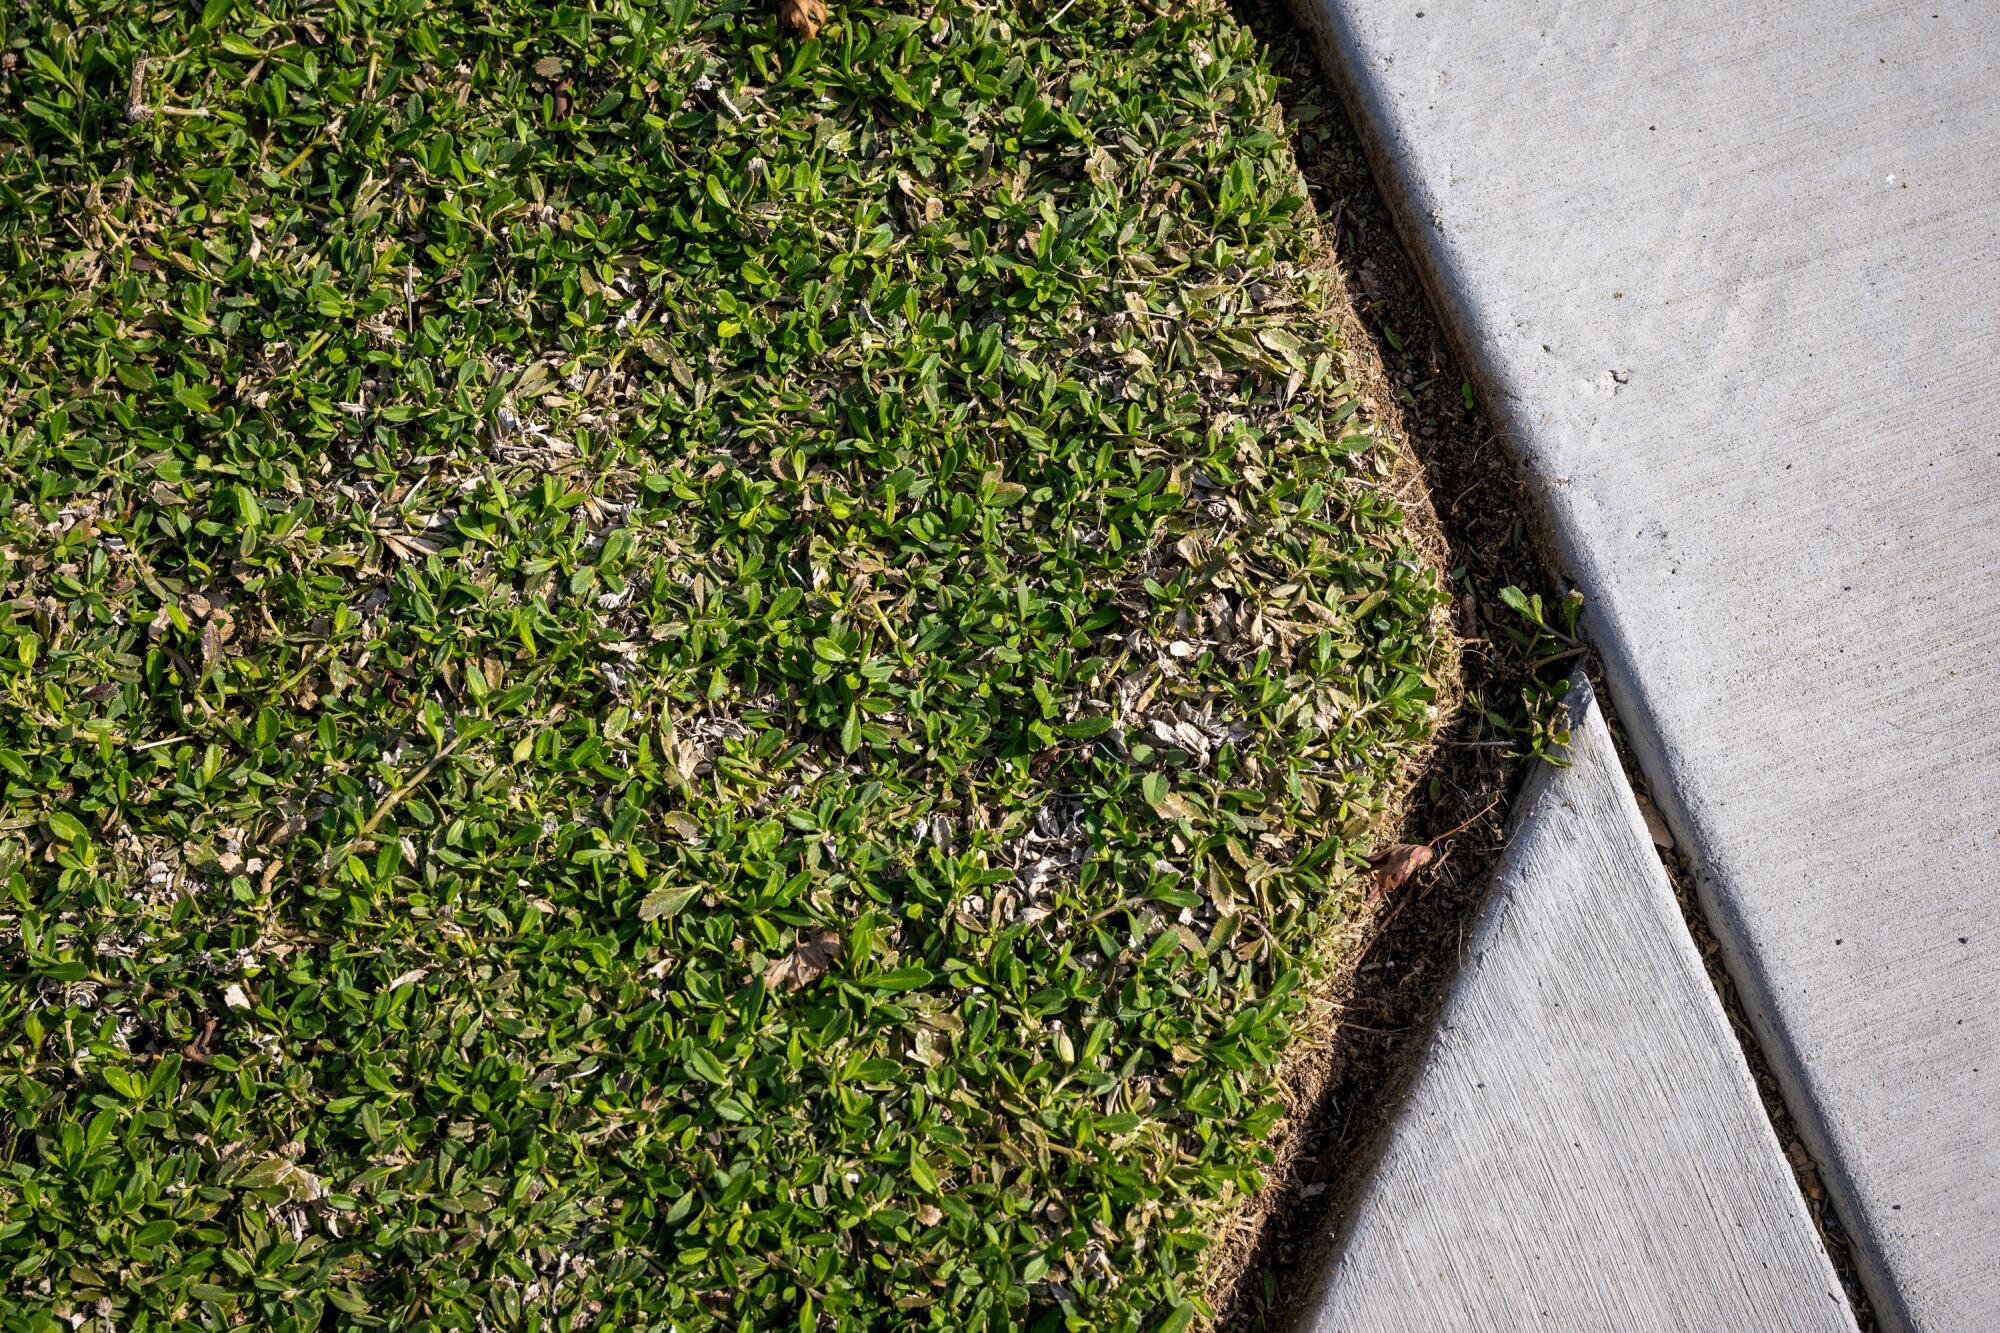 An abstract photo of the edge of groundcover juxtaposed with a piece of concrete walkway.